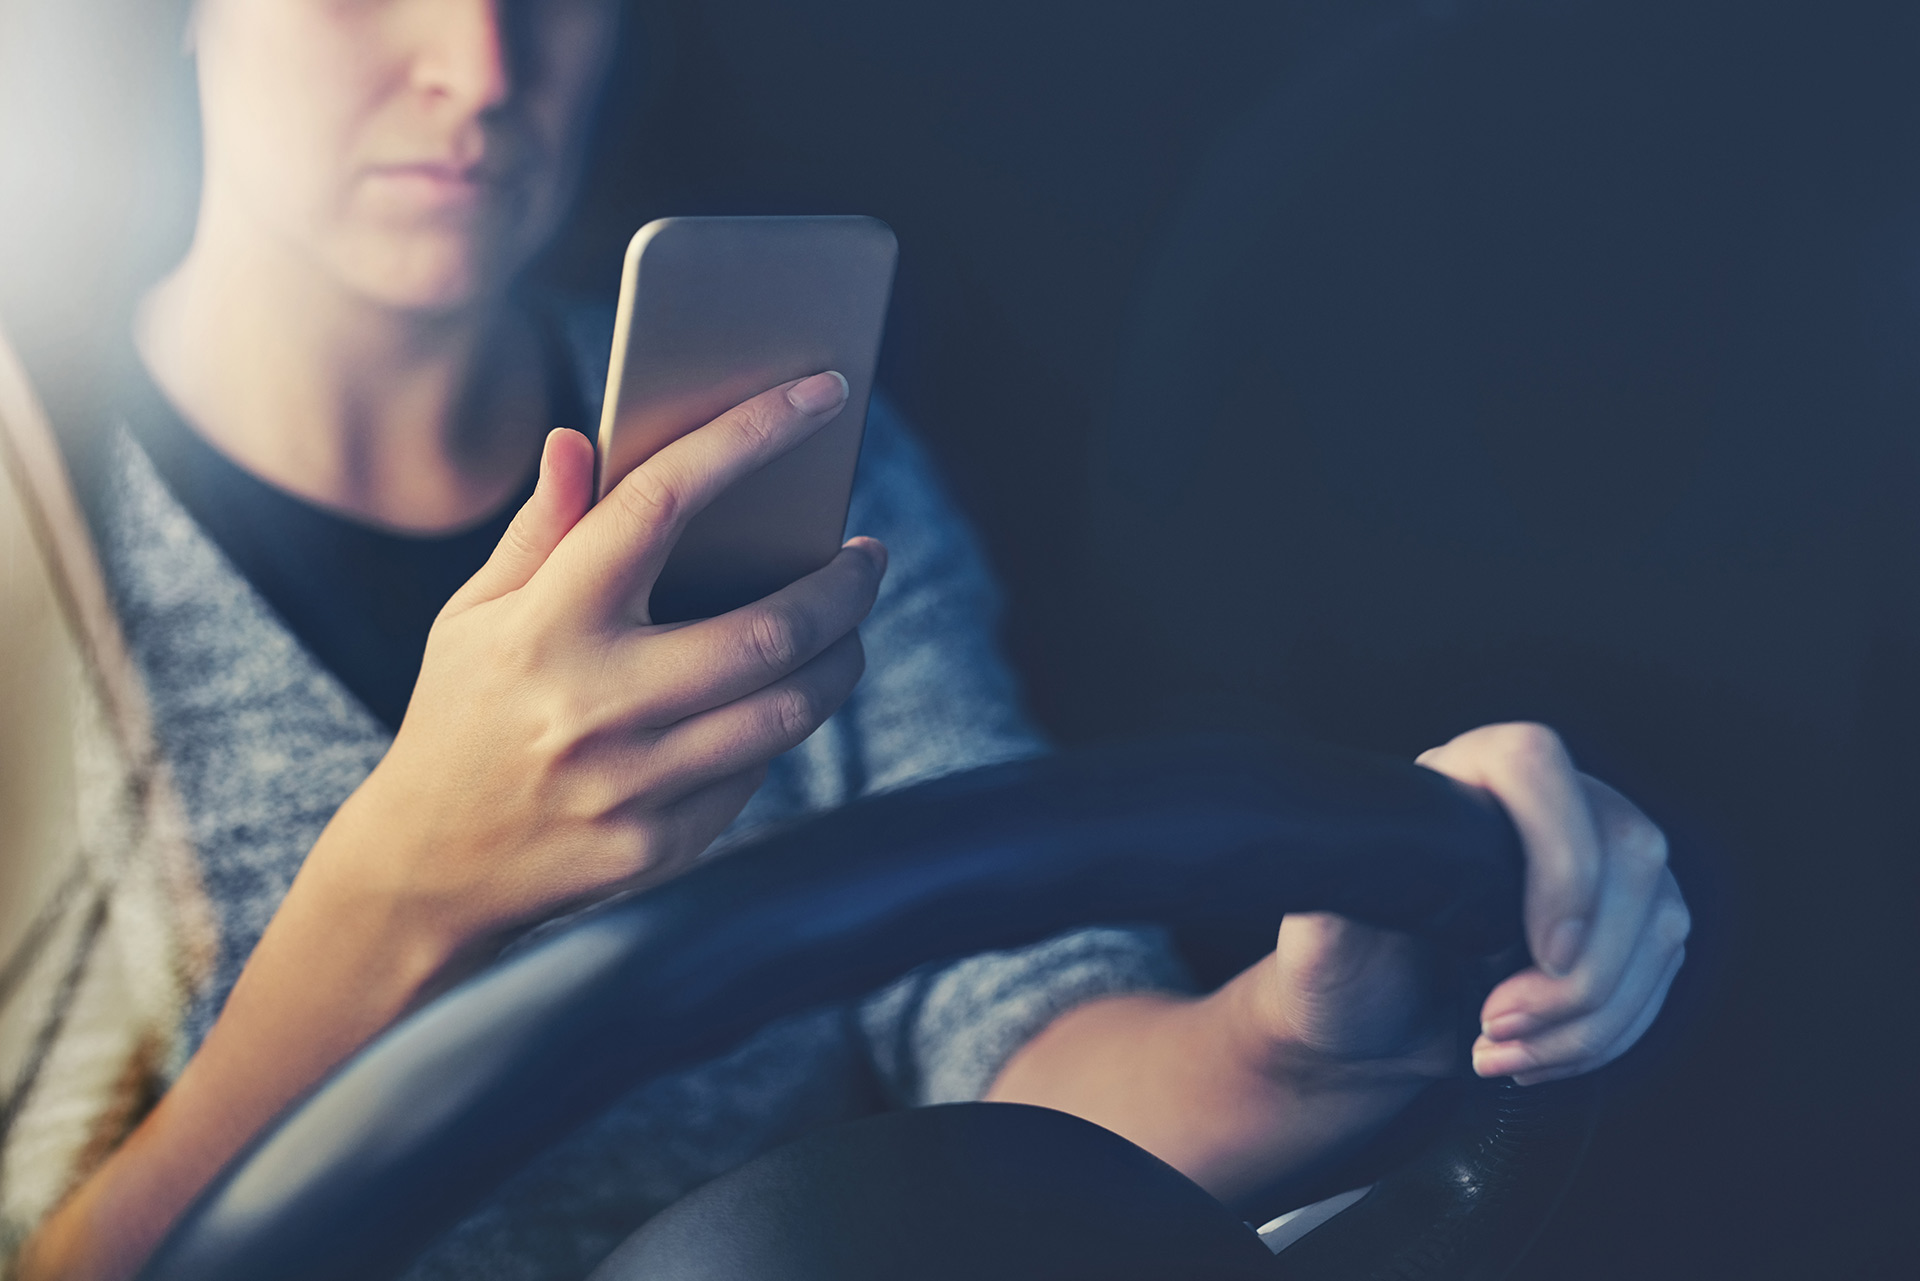 Infographic: Distracted Driving: How Distracted Are Drivers Really?